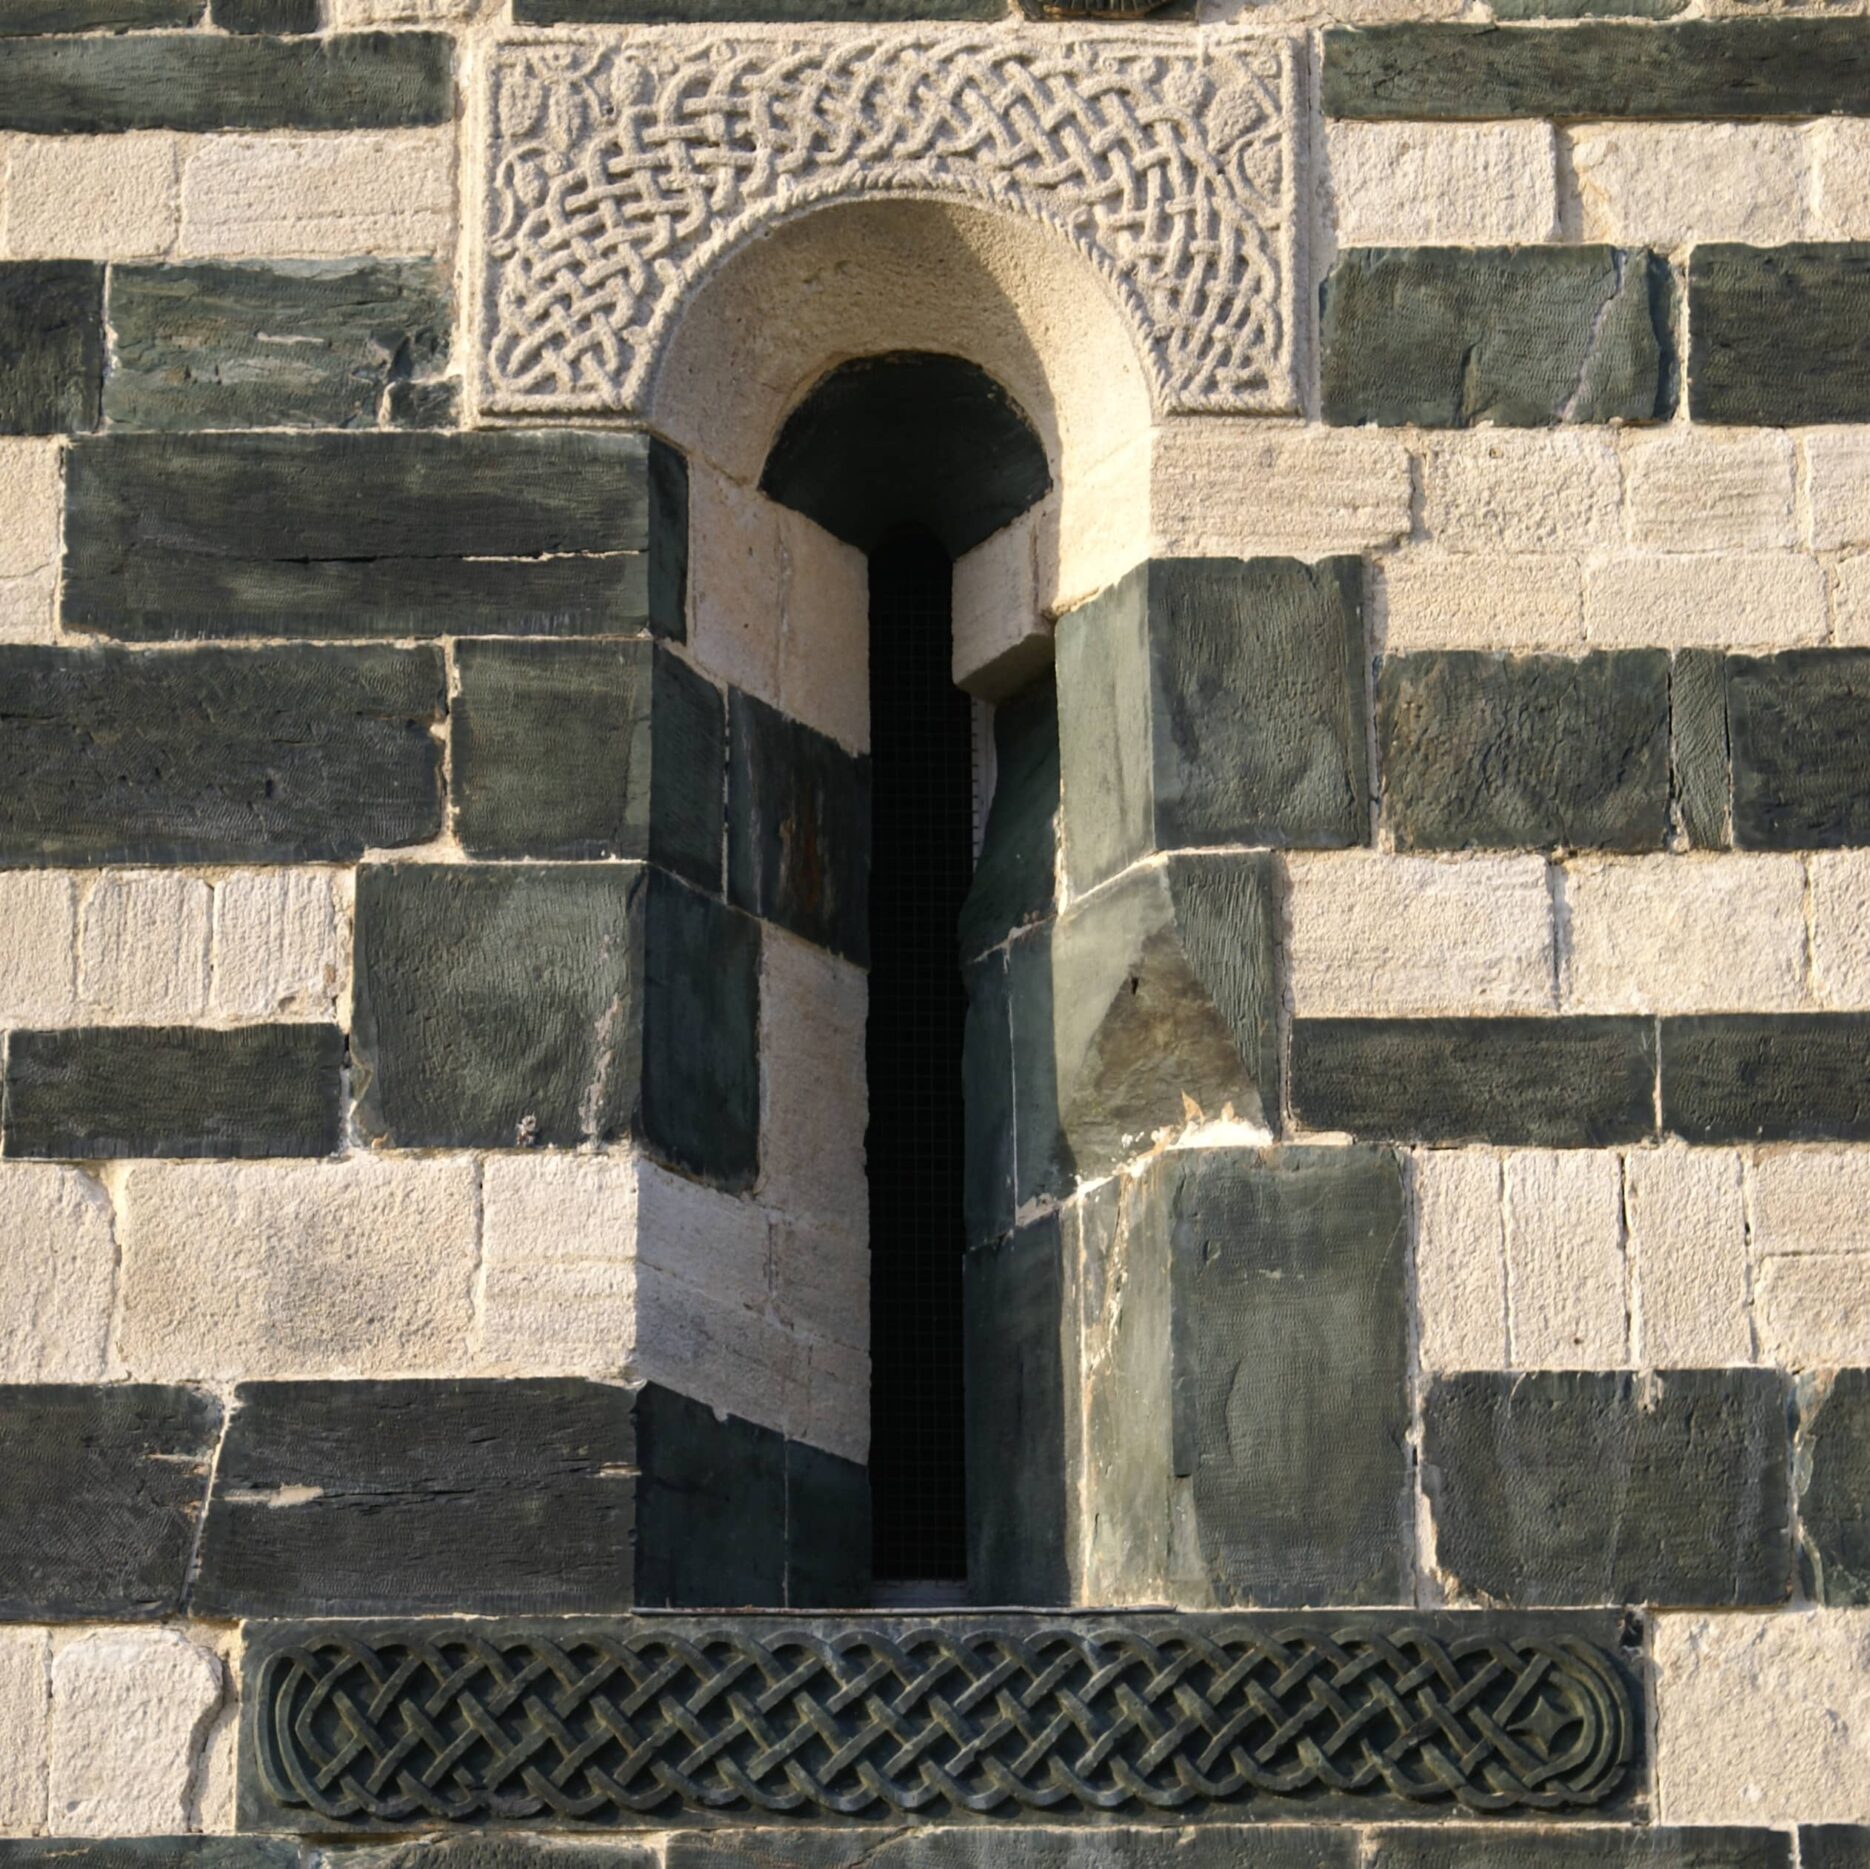 A loophole whose lintel and sill are carved with decorations: at the top, knotwork surrounded by vines on white limestone, at the bottom, a characteristic knotwork carved in green serpentinite stone.